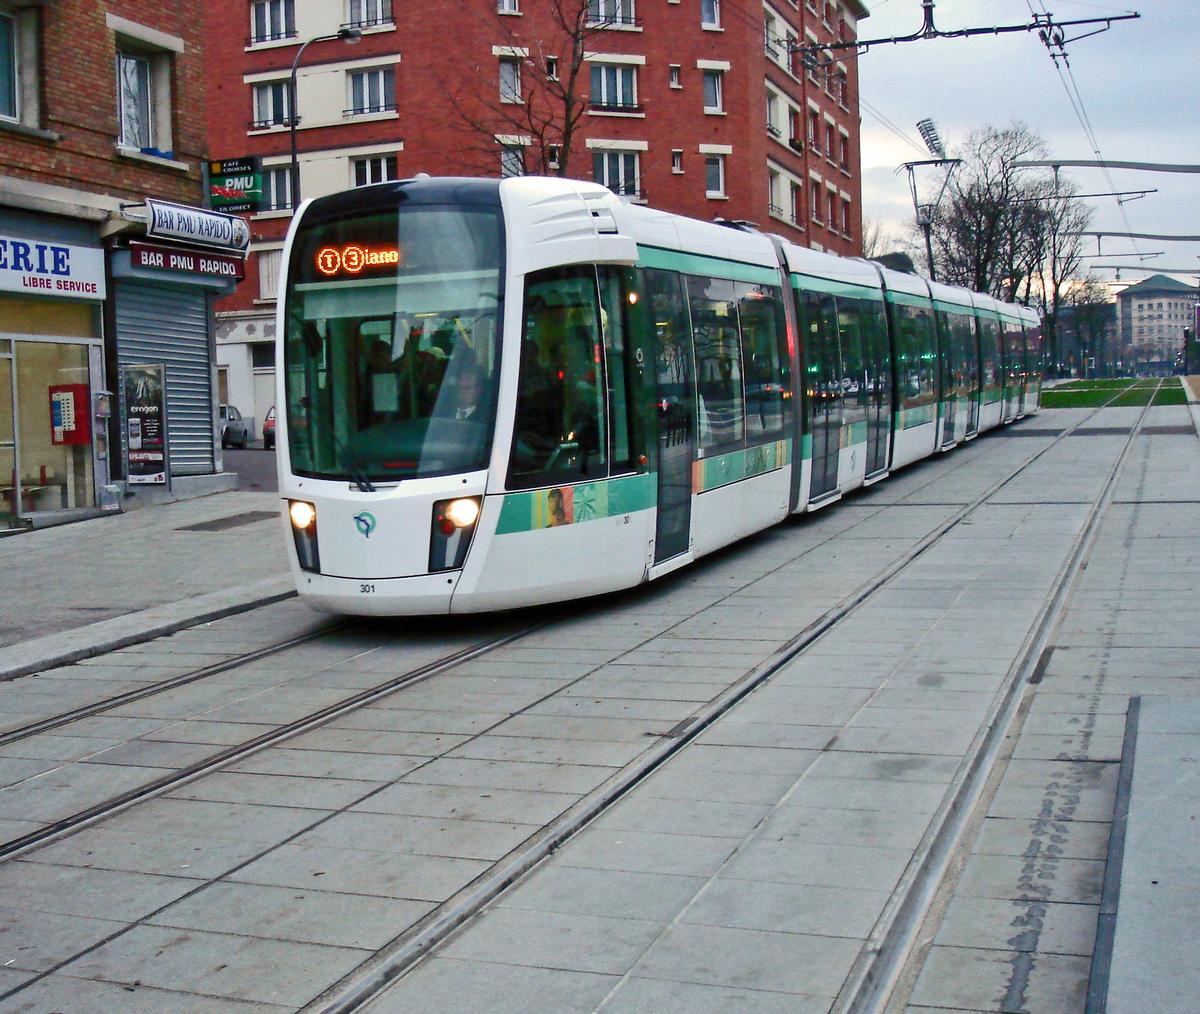 T3 Tramway Line in Paris on opening day 